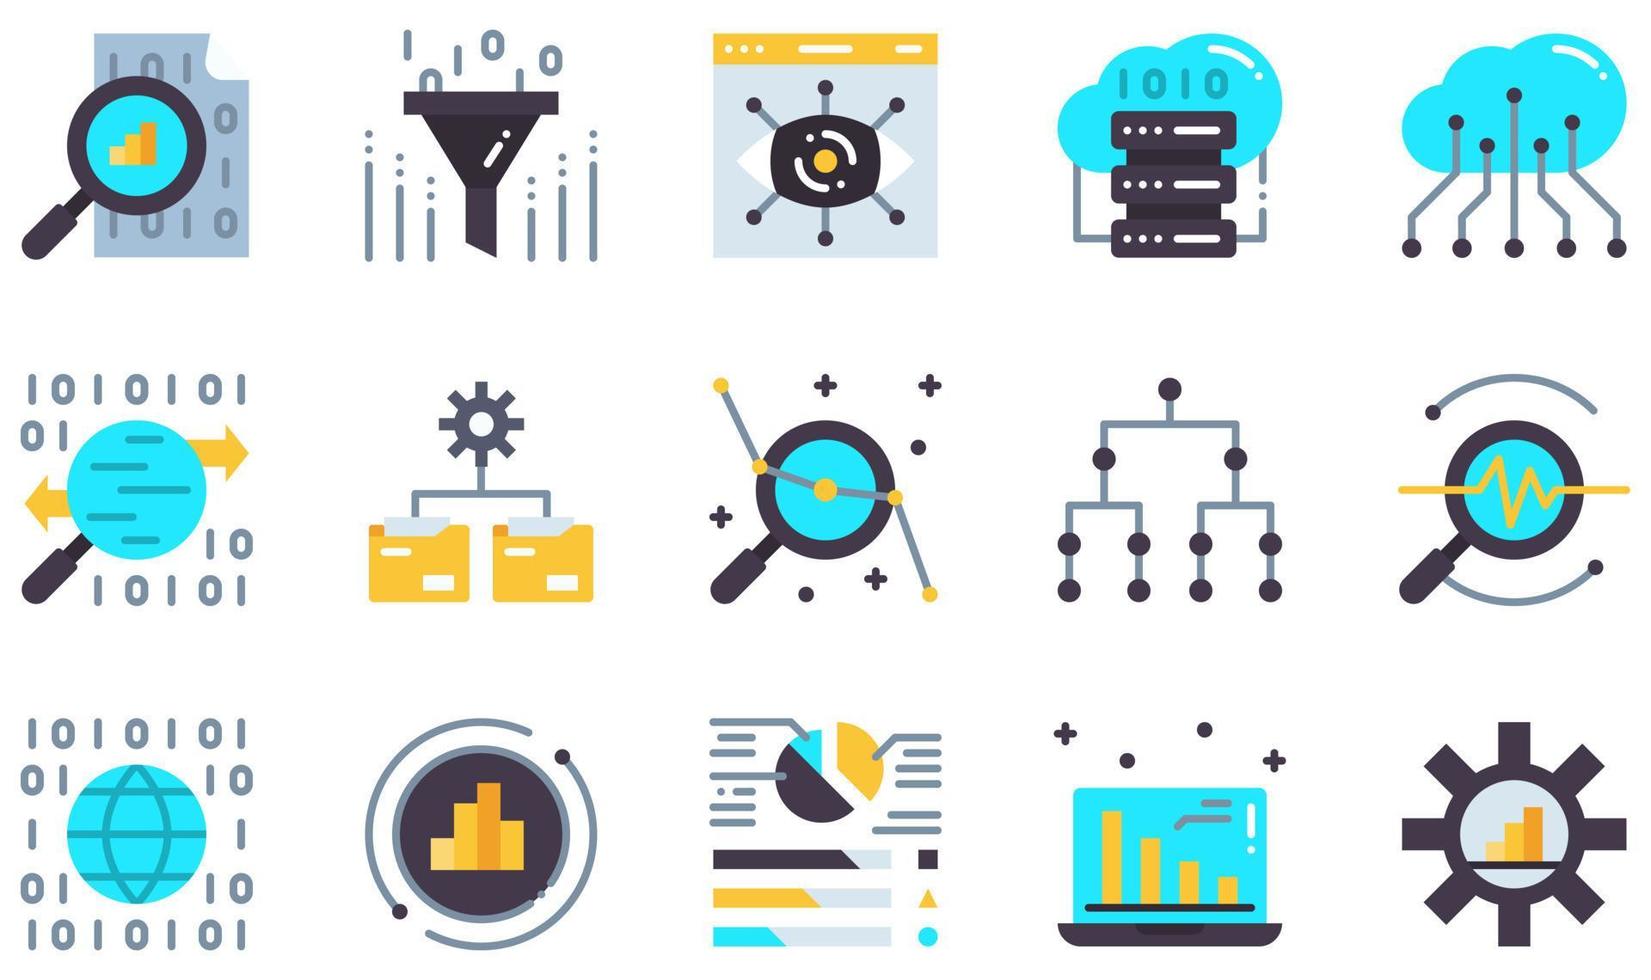 Set of Vector Icons Related to Data Analysis. Contains such Icons as Data Visualization, Big Data, Cloud Data, Traffic Analyse, Global Data, Statistics and more.